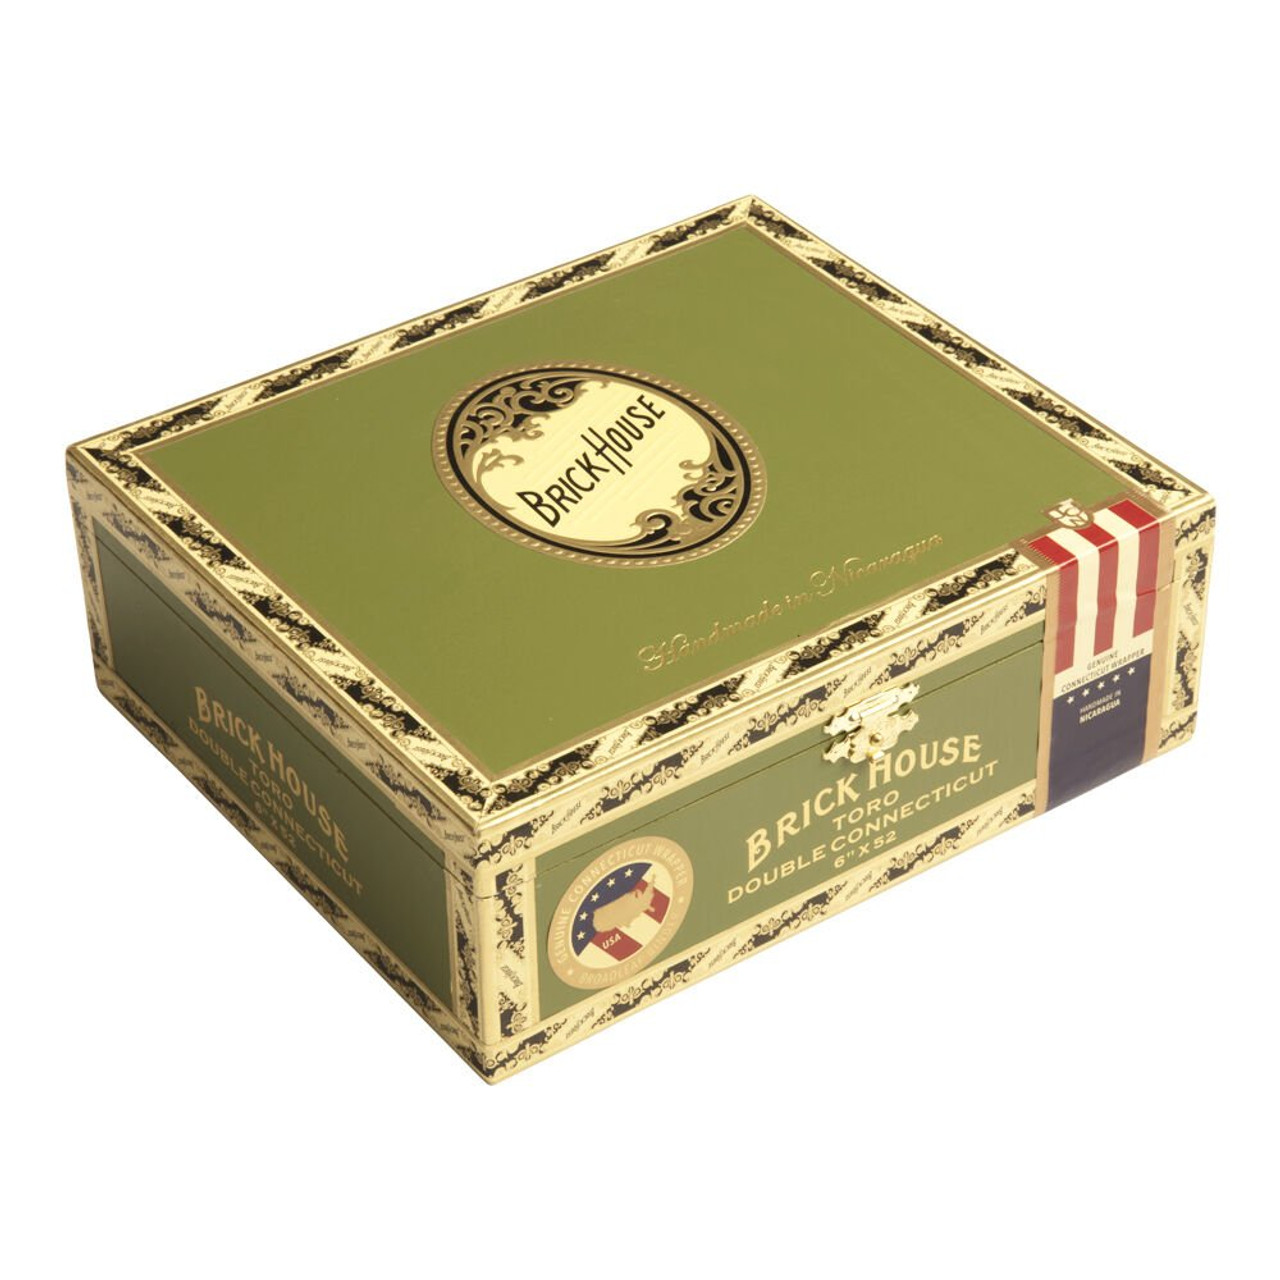 Brick House Double Connecticut Mighty Mighty Cigars - 6.25 x 60 (Box of 25) *Box